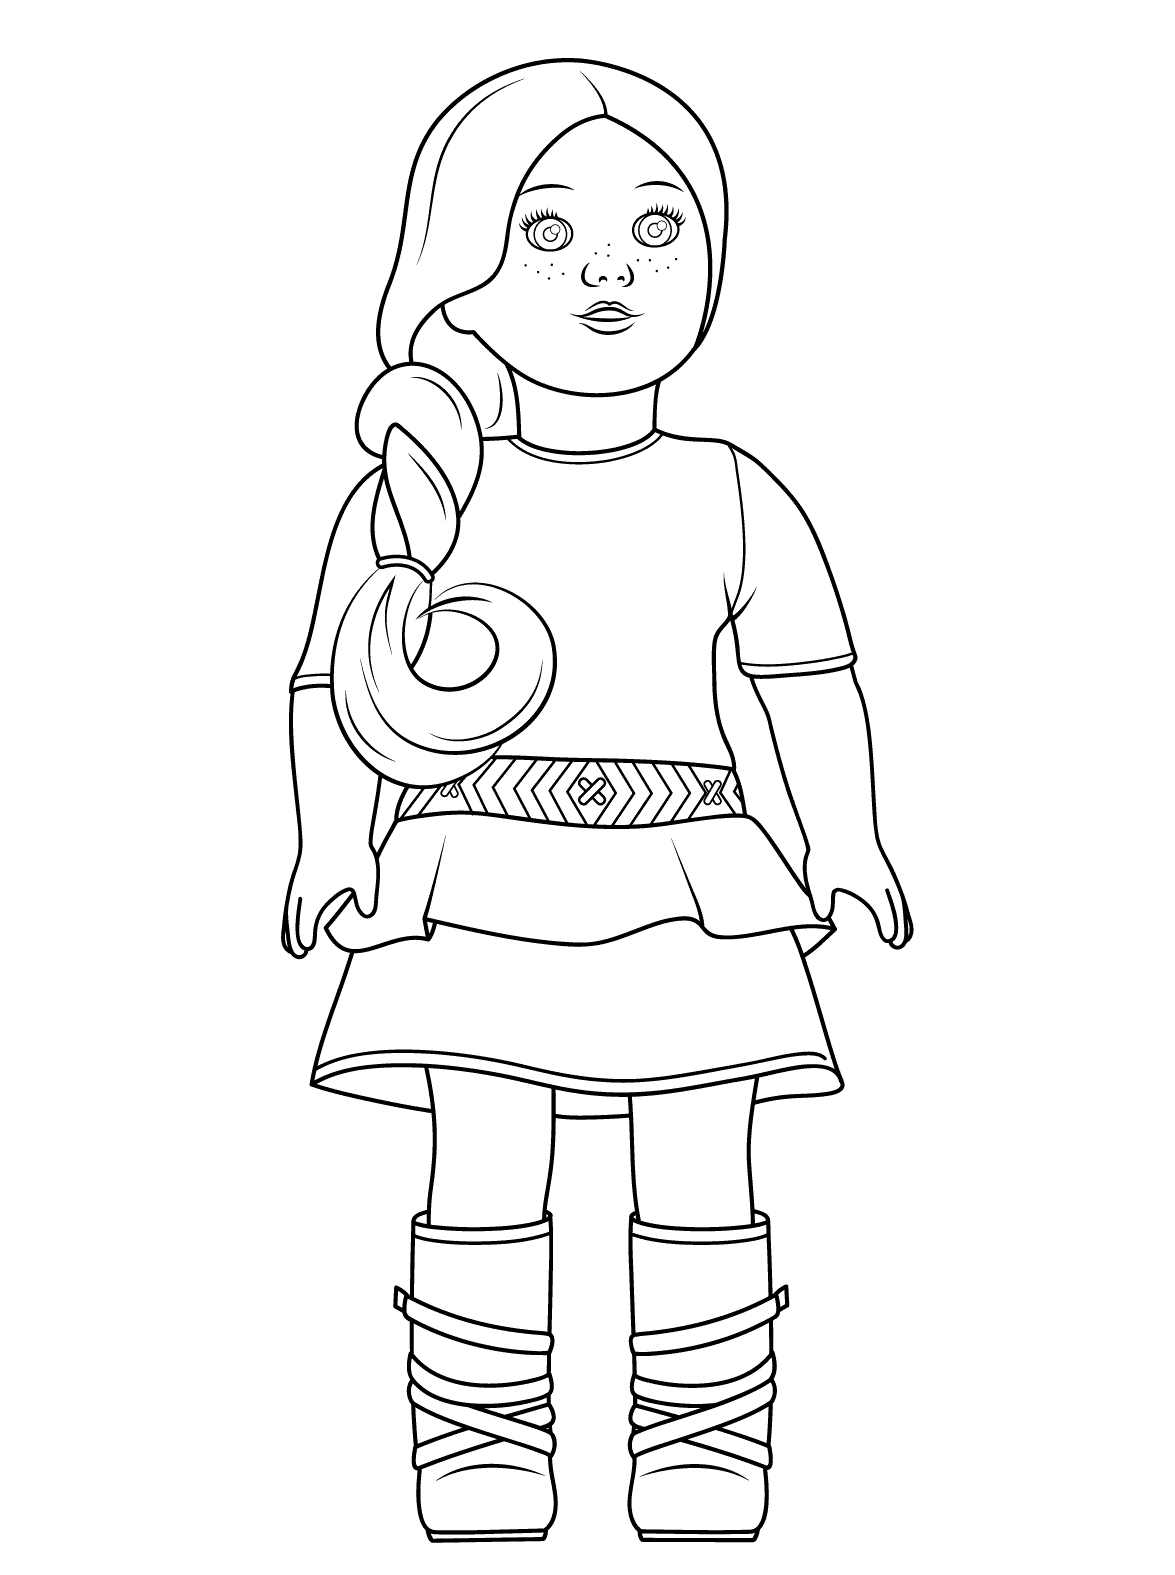 https://www.bestcoloringpagesforkids.com/wp-content/uploads/2018/12/American-Girl-Coloring-Page-Kaya.png